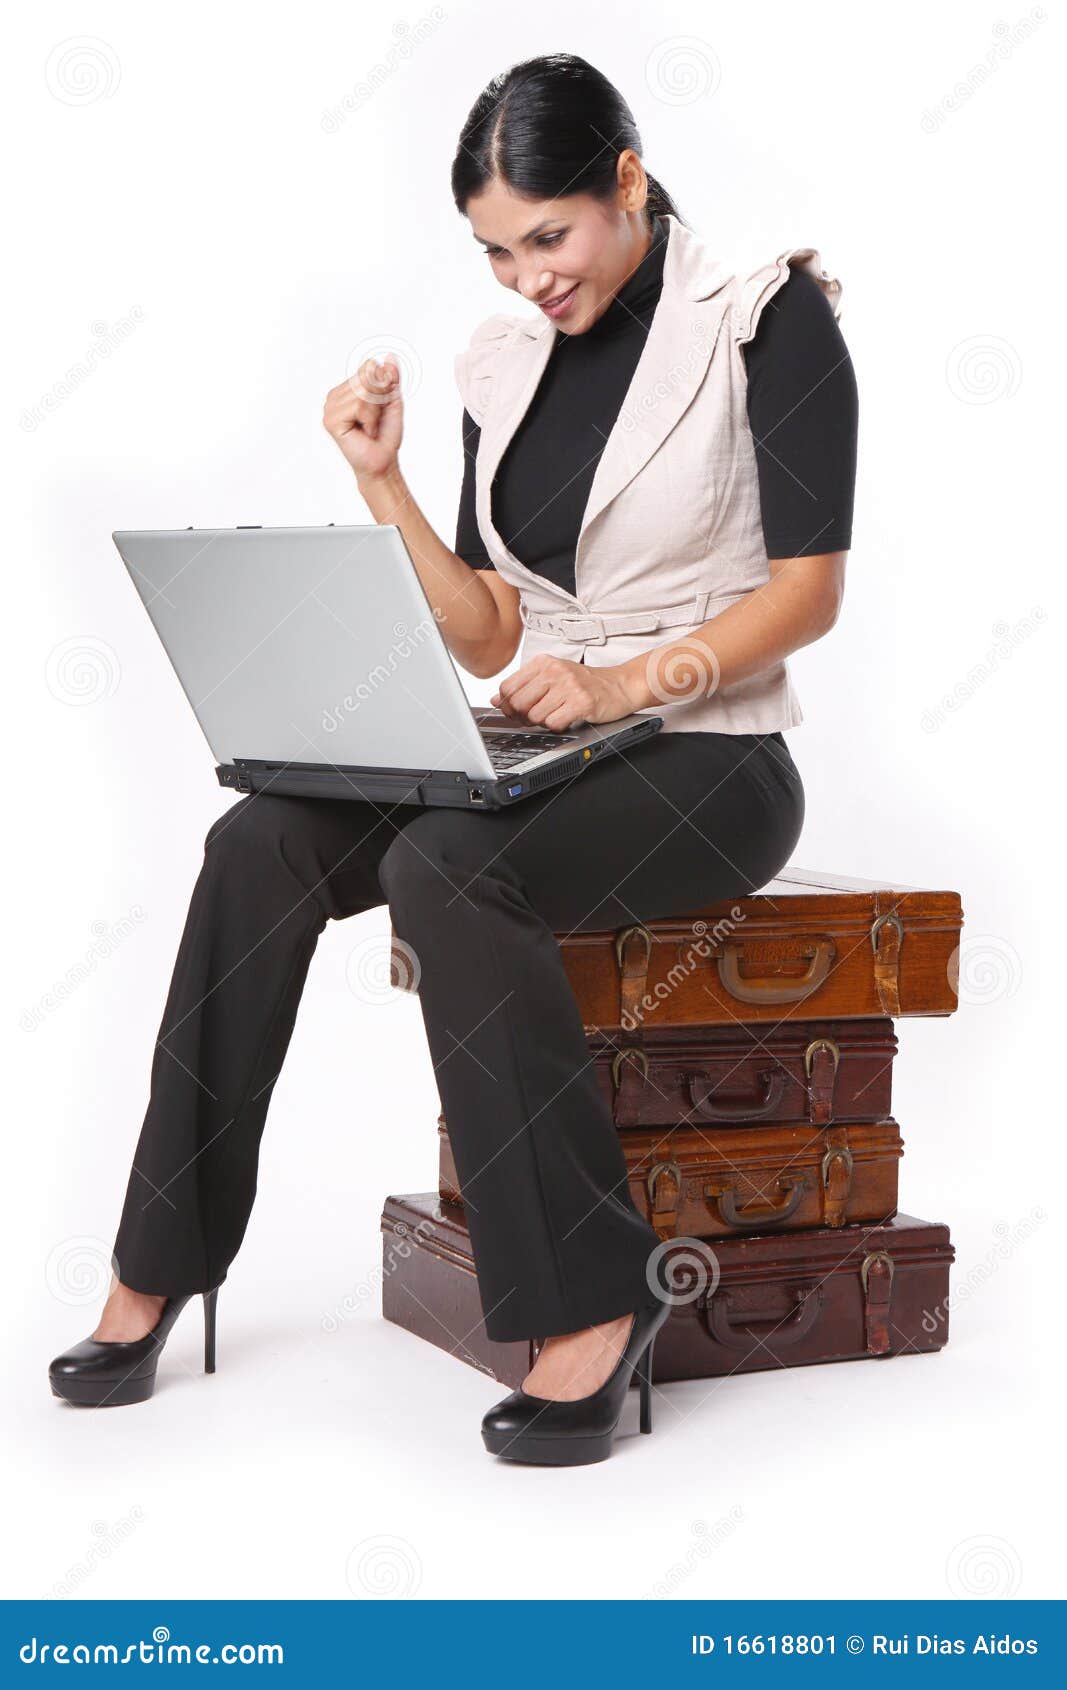 Laptop search stock image. Image of adult, briefcase - 16618801